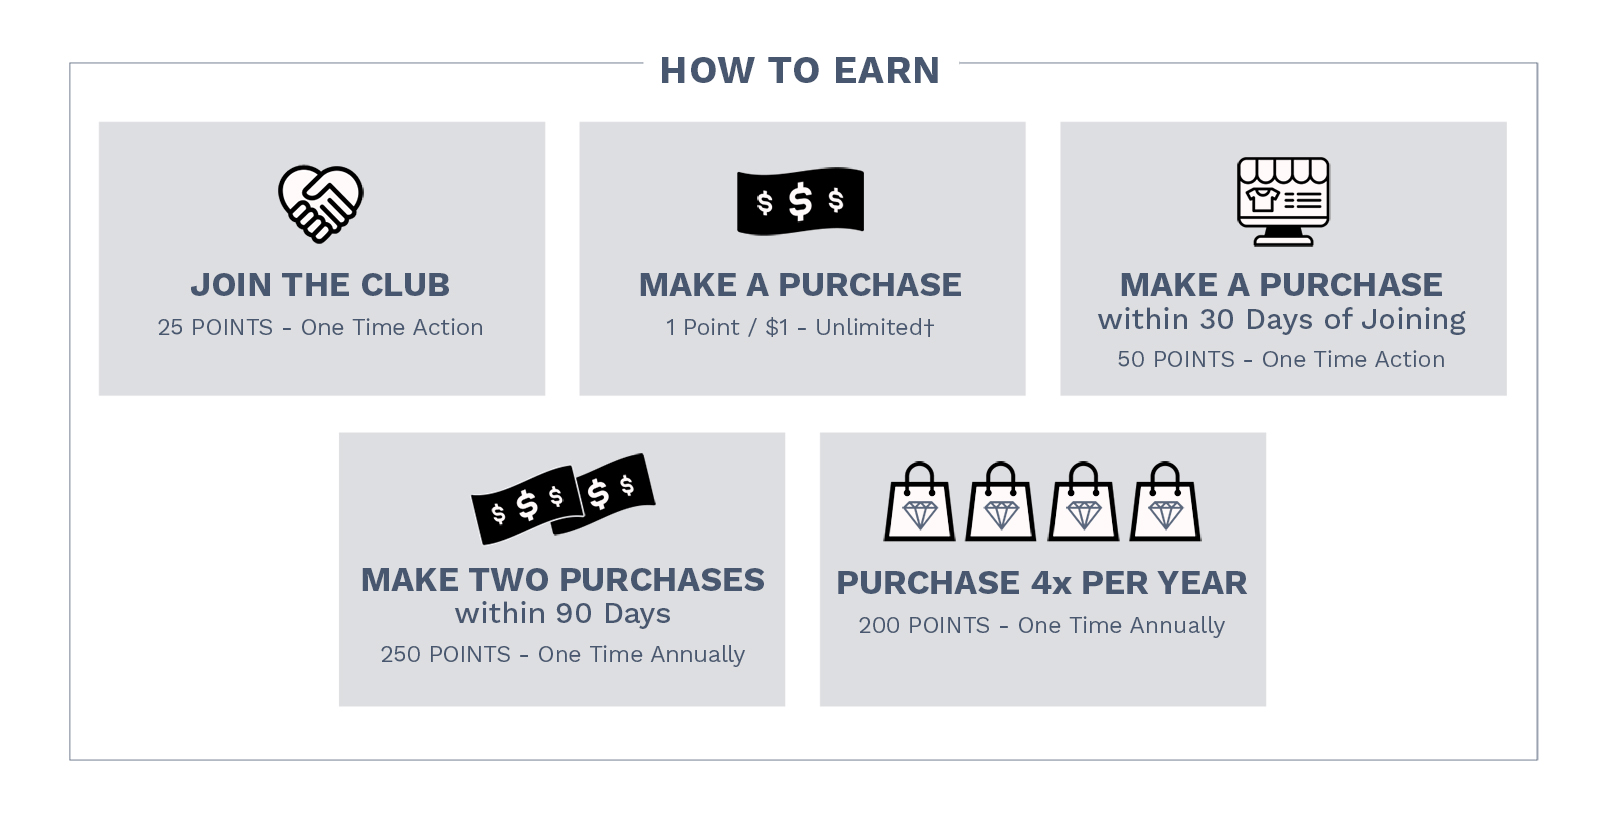 How to Earn. Join the Club! 25 points - one time action. Make a Purchase! 1 point / $1 Unlimited.† Make a Purchase within 30 Days of Joining! 50 points - one time action. Make Two Purchases within 90 Days! 250 points - one time annually. Purchase 4x Per Year! 200 points - one time annually.